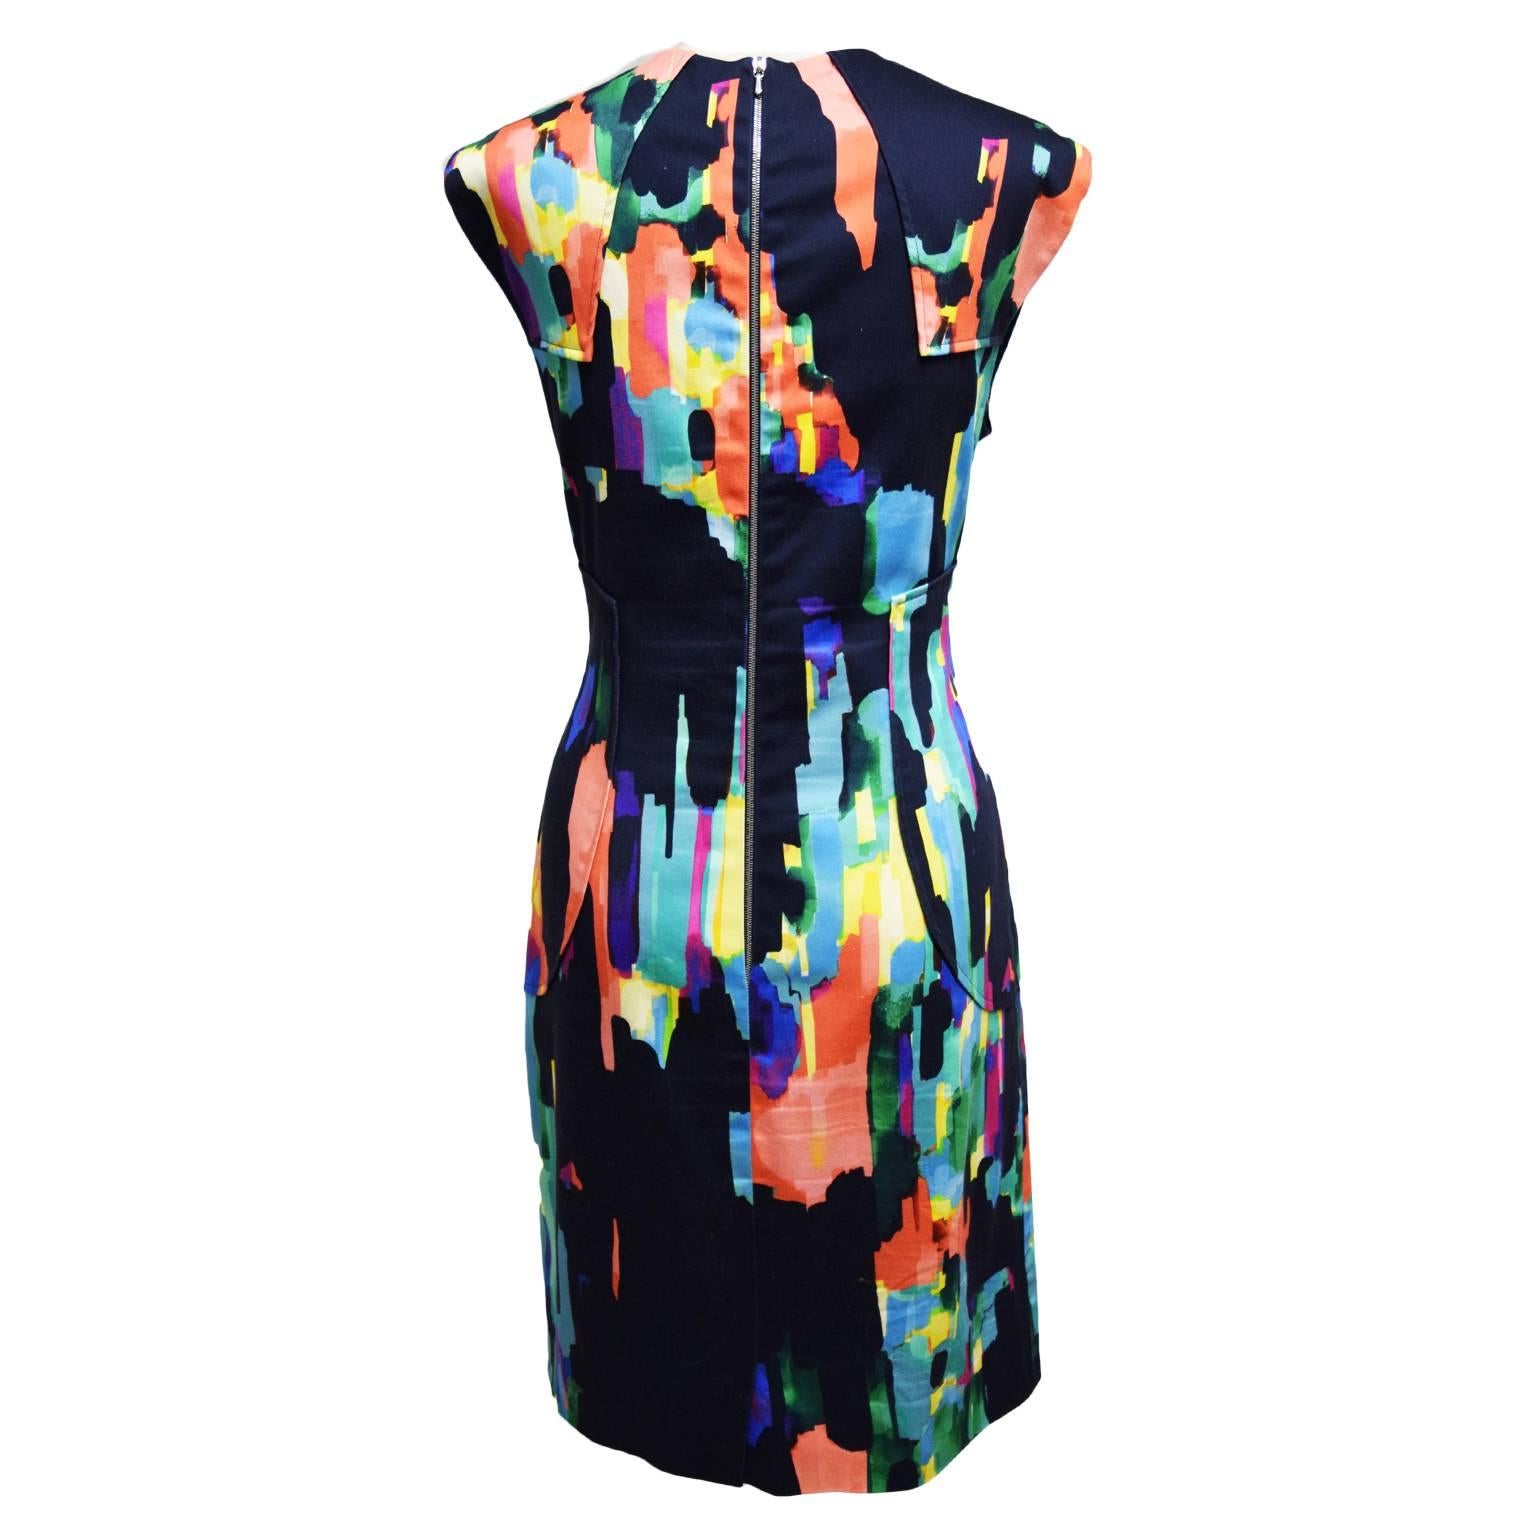 This sheath dress by Lela Rose is 100% cotton and is fully lined making it a refreshing dress for summer. The dress has a multicolored watercolor like paint stroke print and a zipped back closure. The bodice has elongating darts for a more slimming